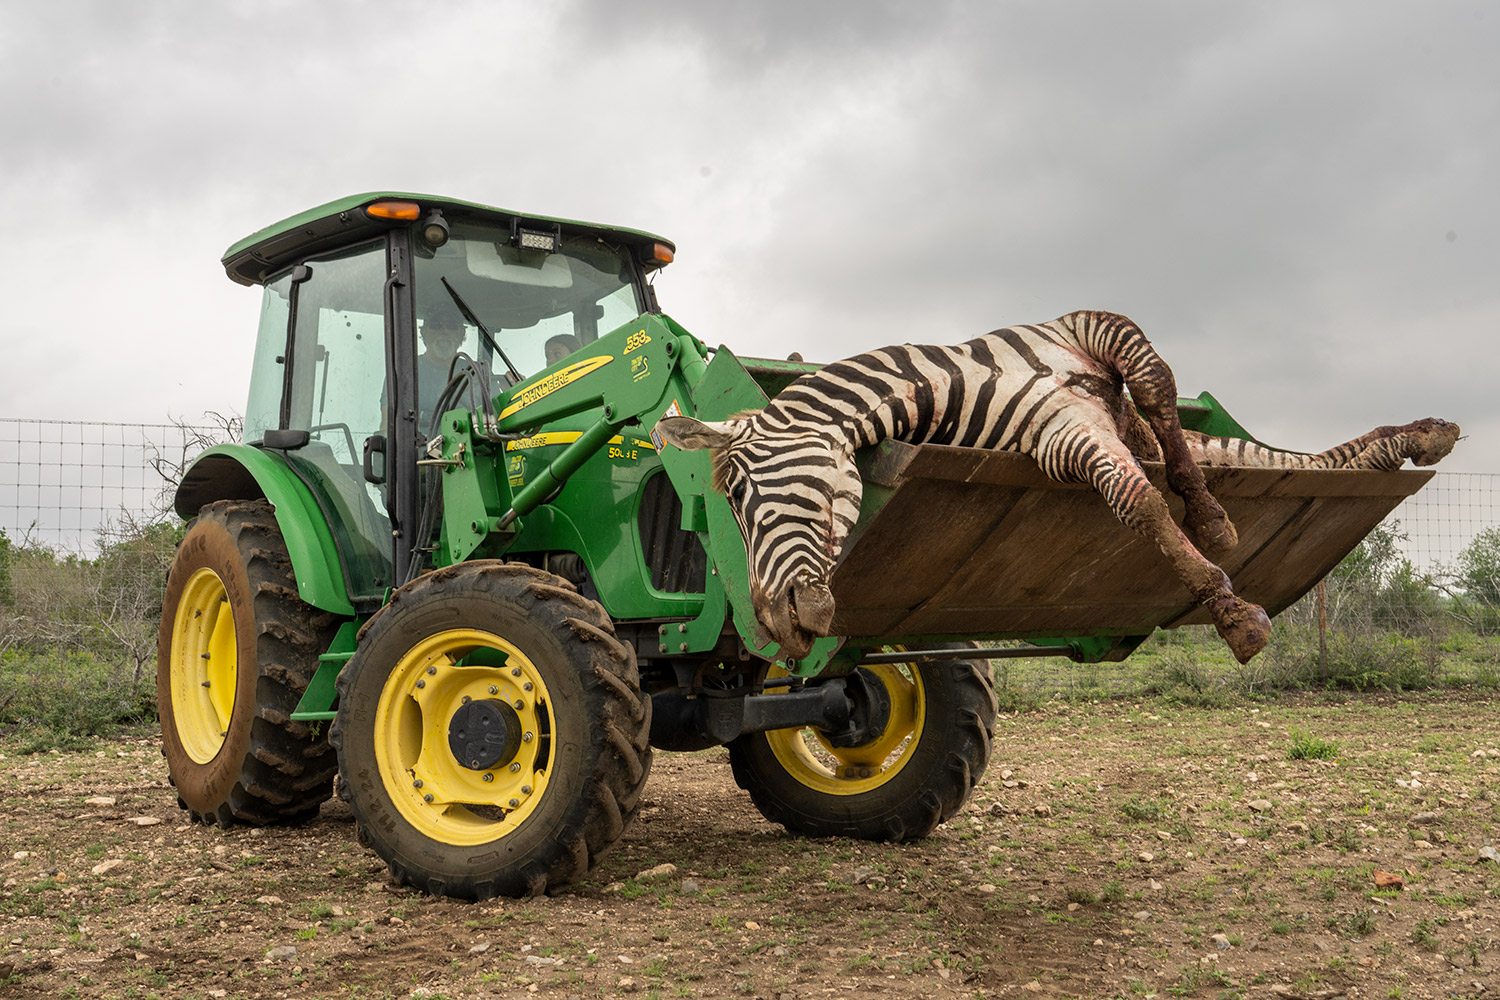 Robert Martin uses a tractor to haul the zebra from the field to the skinning shed.